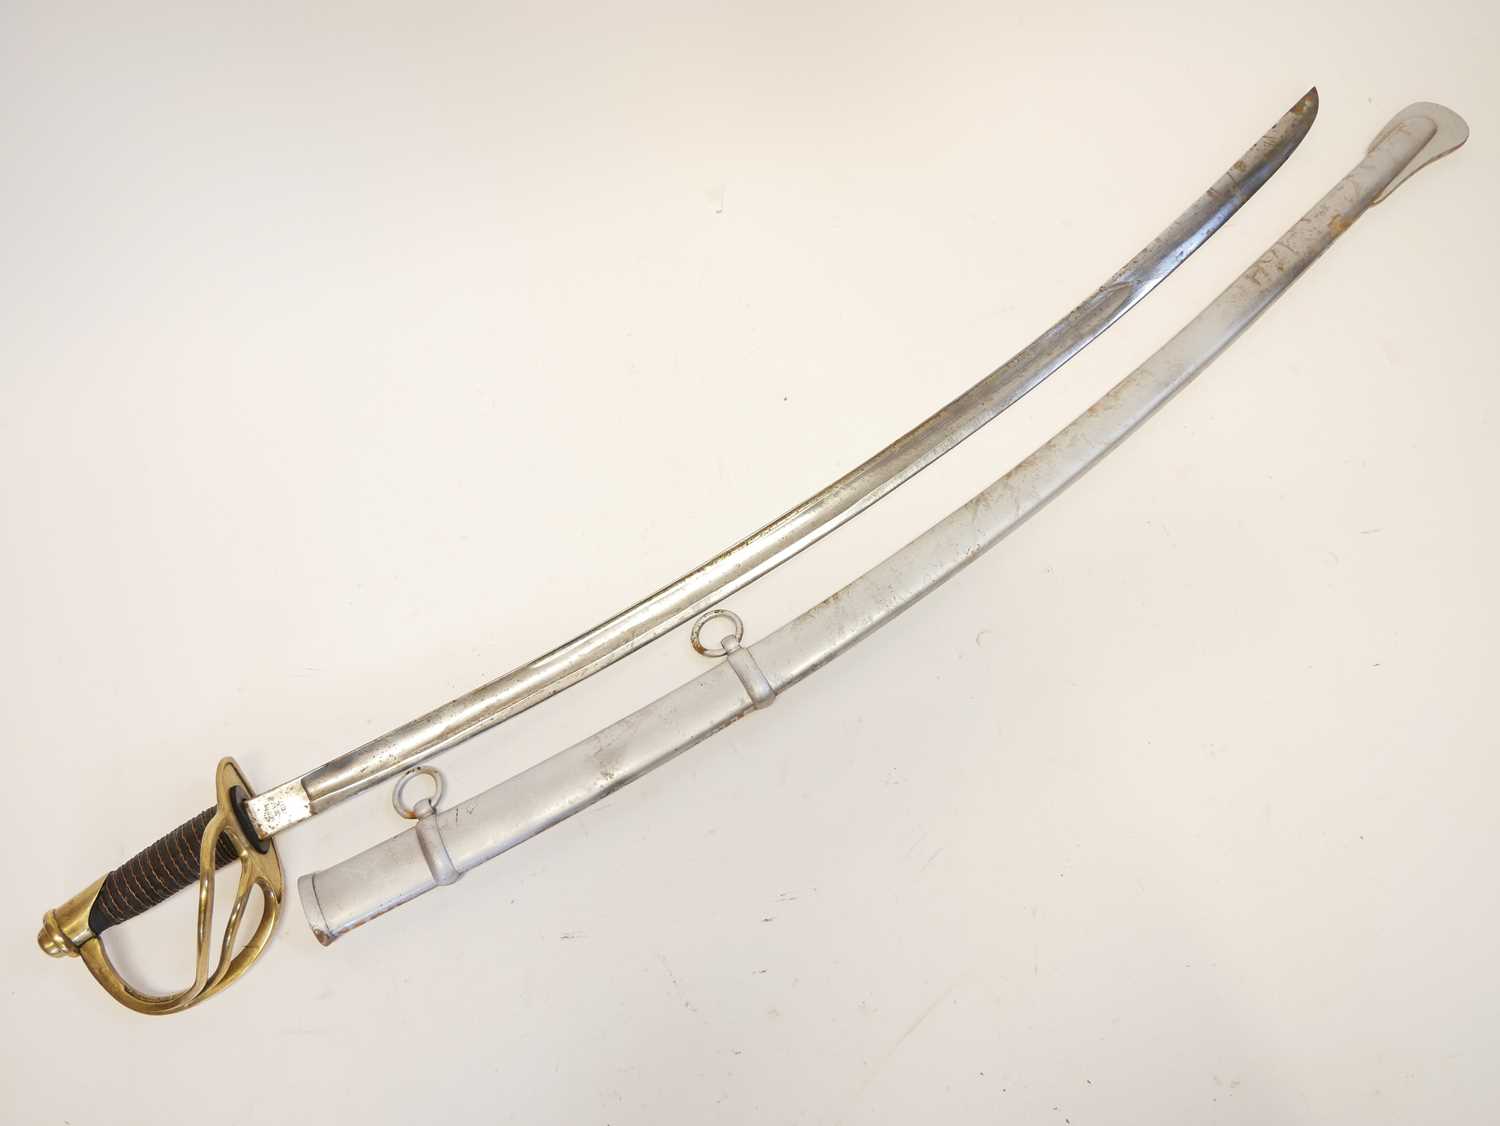 Reproduction US wrist breaker cavalry sabre and scabbard, curved fullered blade with brass guard and - Image 2 of 11